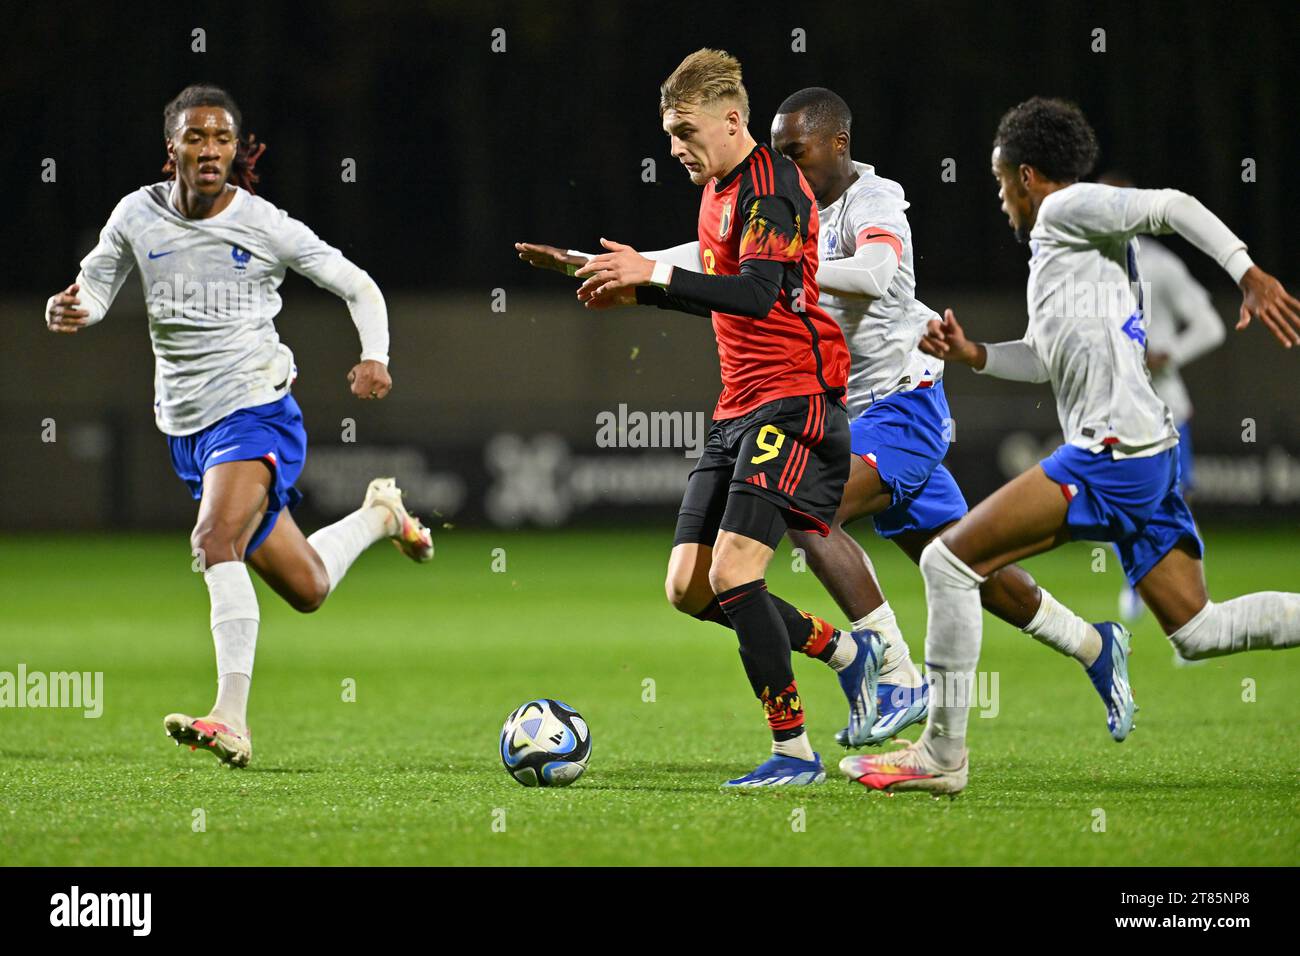 Tubize, Belgium. 18th Nov, 2023. Brahim TRAORE (5) of France, Yoan KORE (15) of France and Therence KOUDOU (20) of France pictured defending on Norman Bassette (9) of Belgium during a friendly soccer game between the national under 20 teams of Belgium and France on Saturday 18 November 2023 in Tubize, Belgium . Credit: sportpix/Alamy Live News Stock Photo